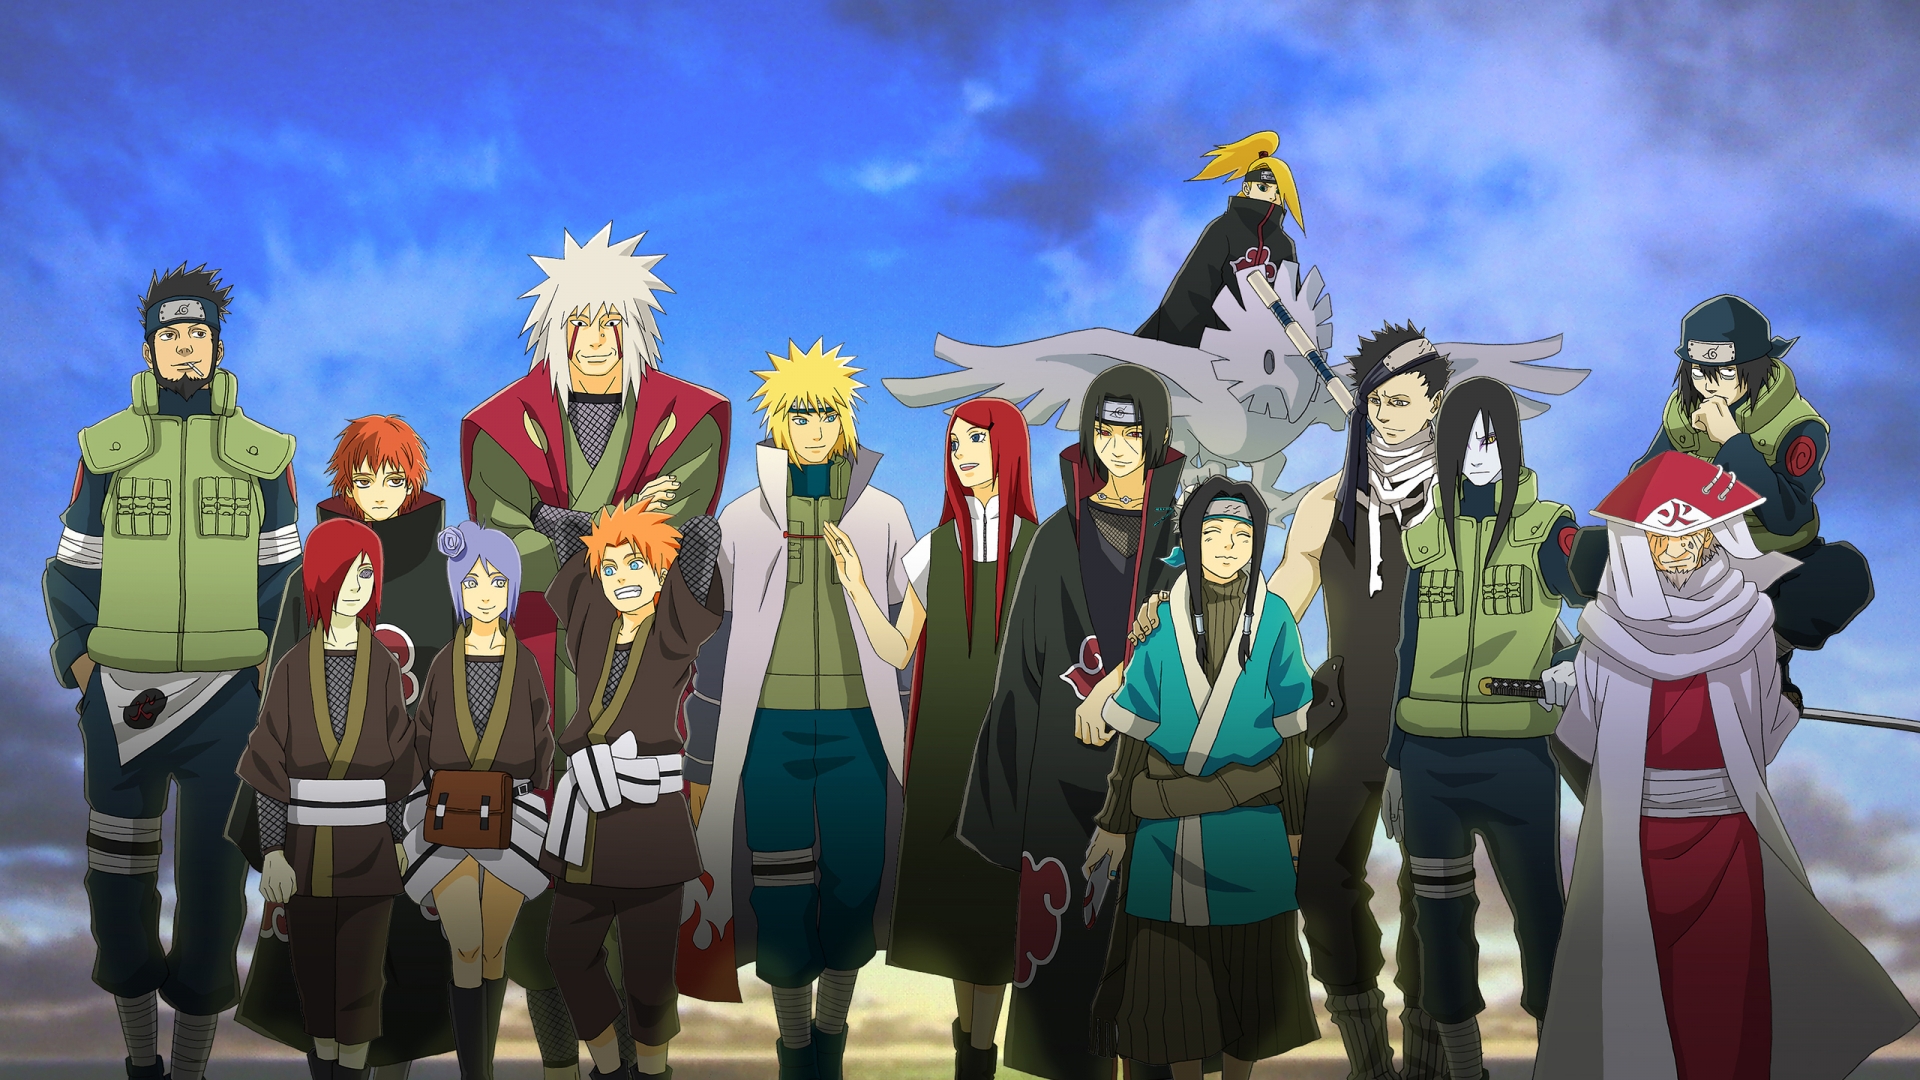 Naruto Friends for 1920 x 1080 HDTV 1080p resolution